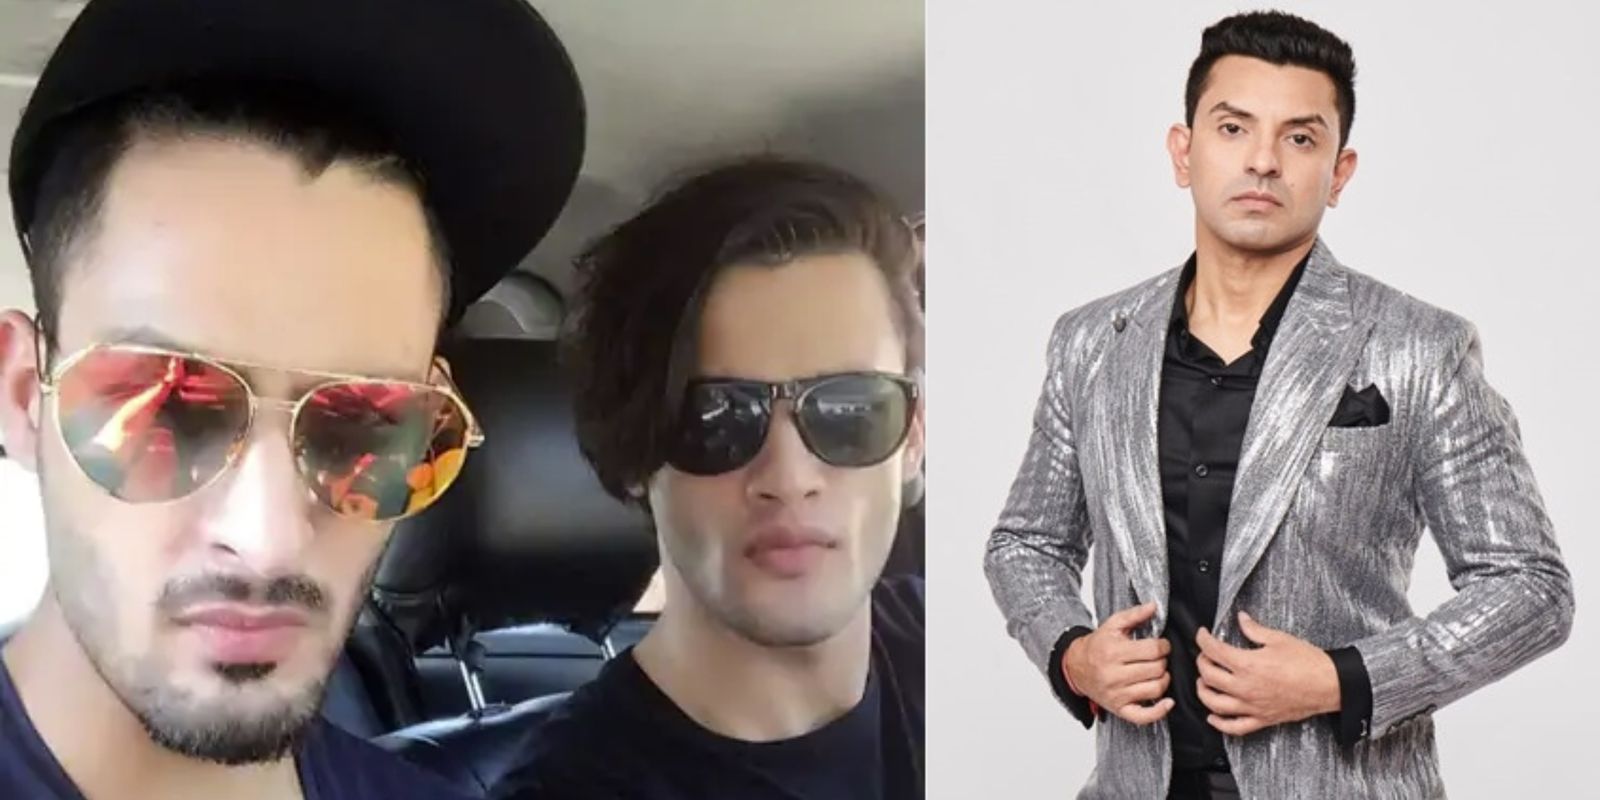 Bigg Boss 13: Asim Riaz’s Brother Lashes Out On Tehseen Poonawalla After He Bullies Him!